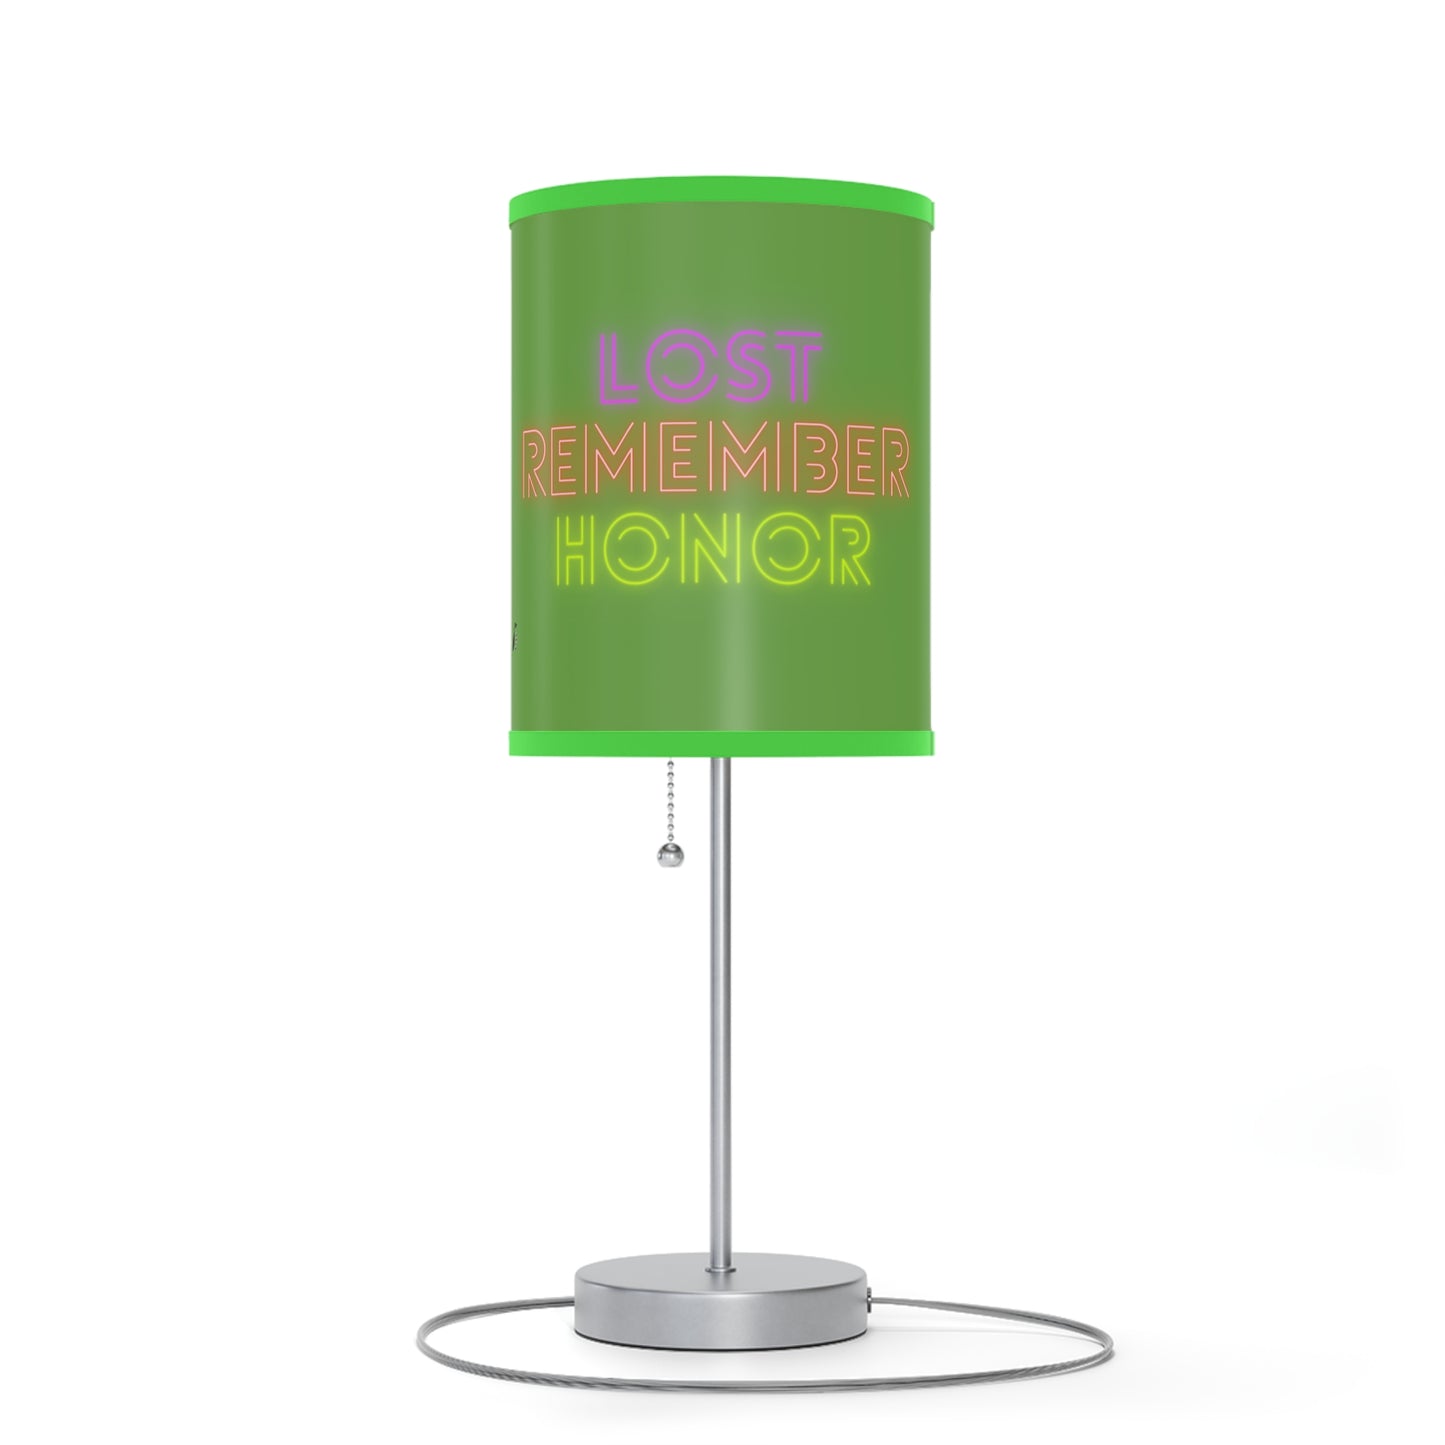 Lamp on a Stand, US|CA plug: Wrestling Green